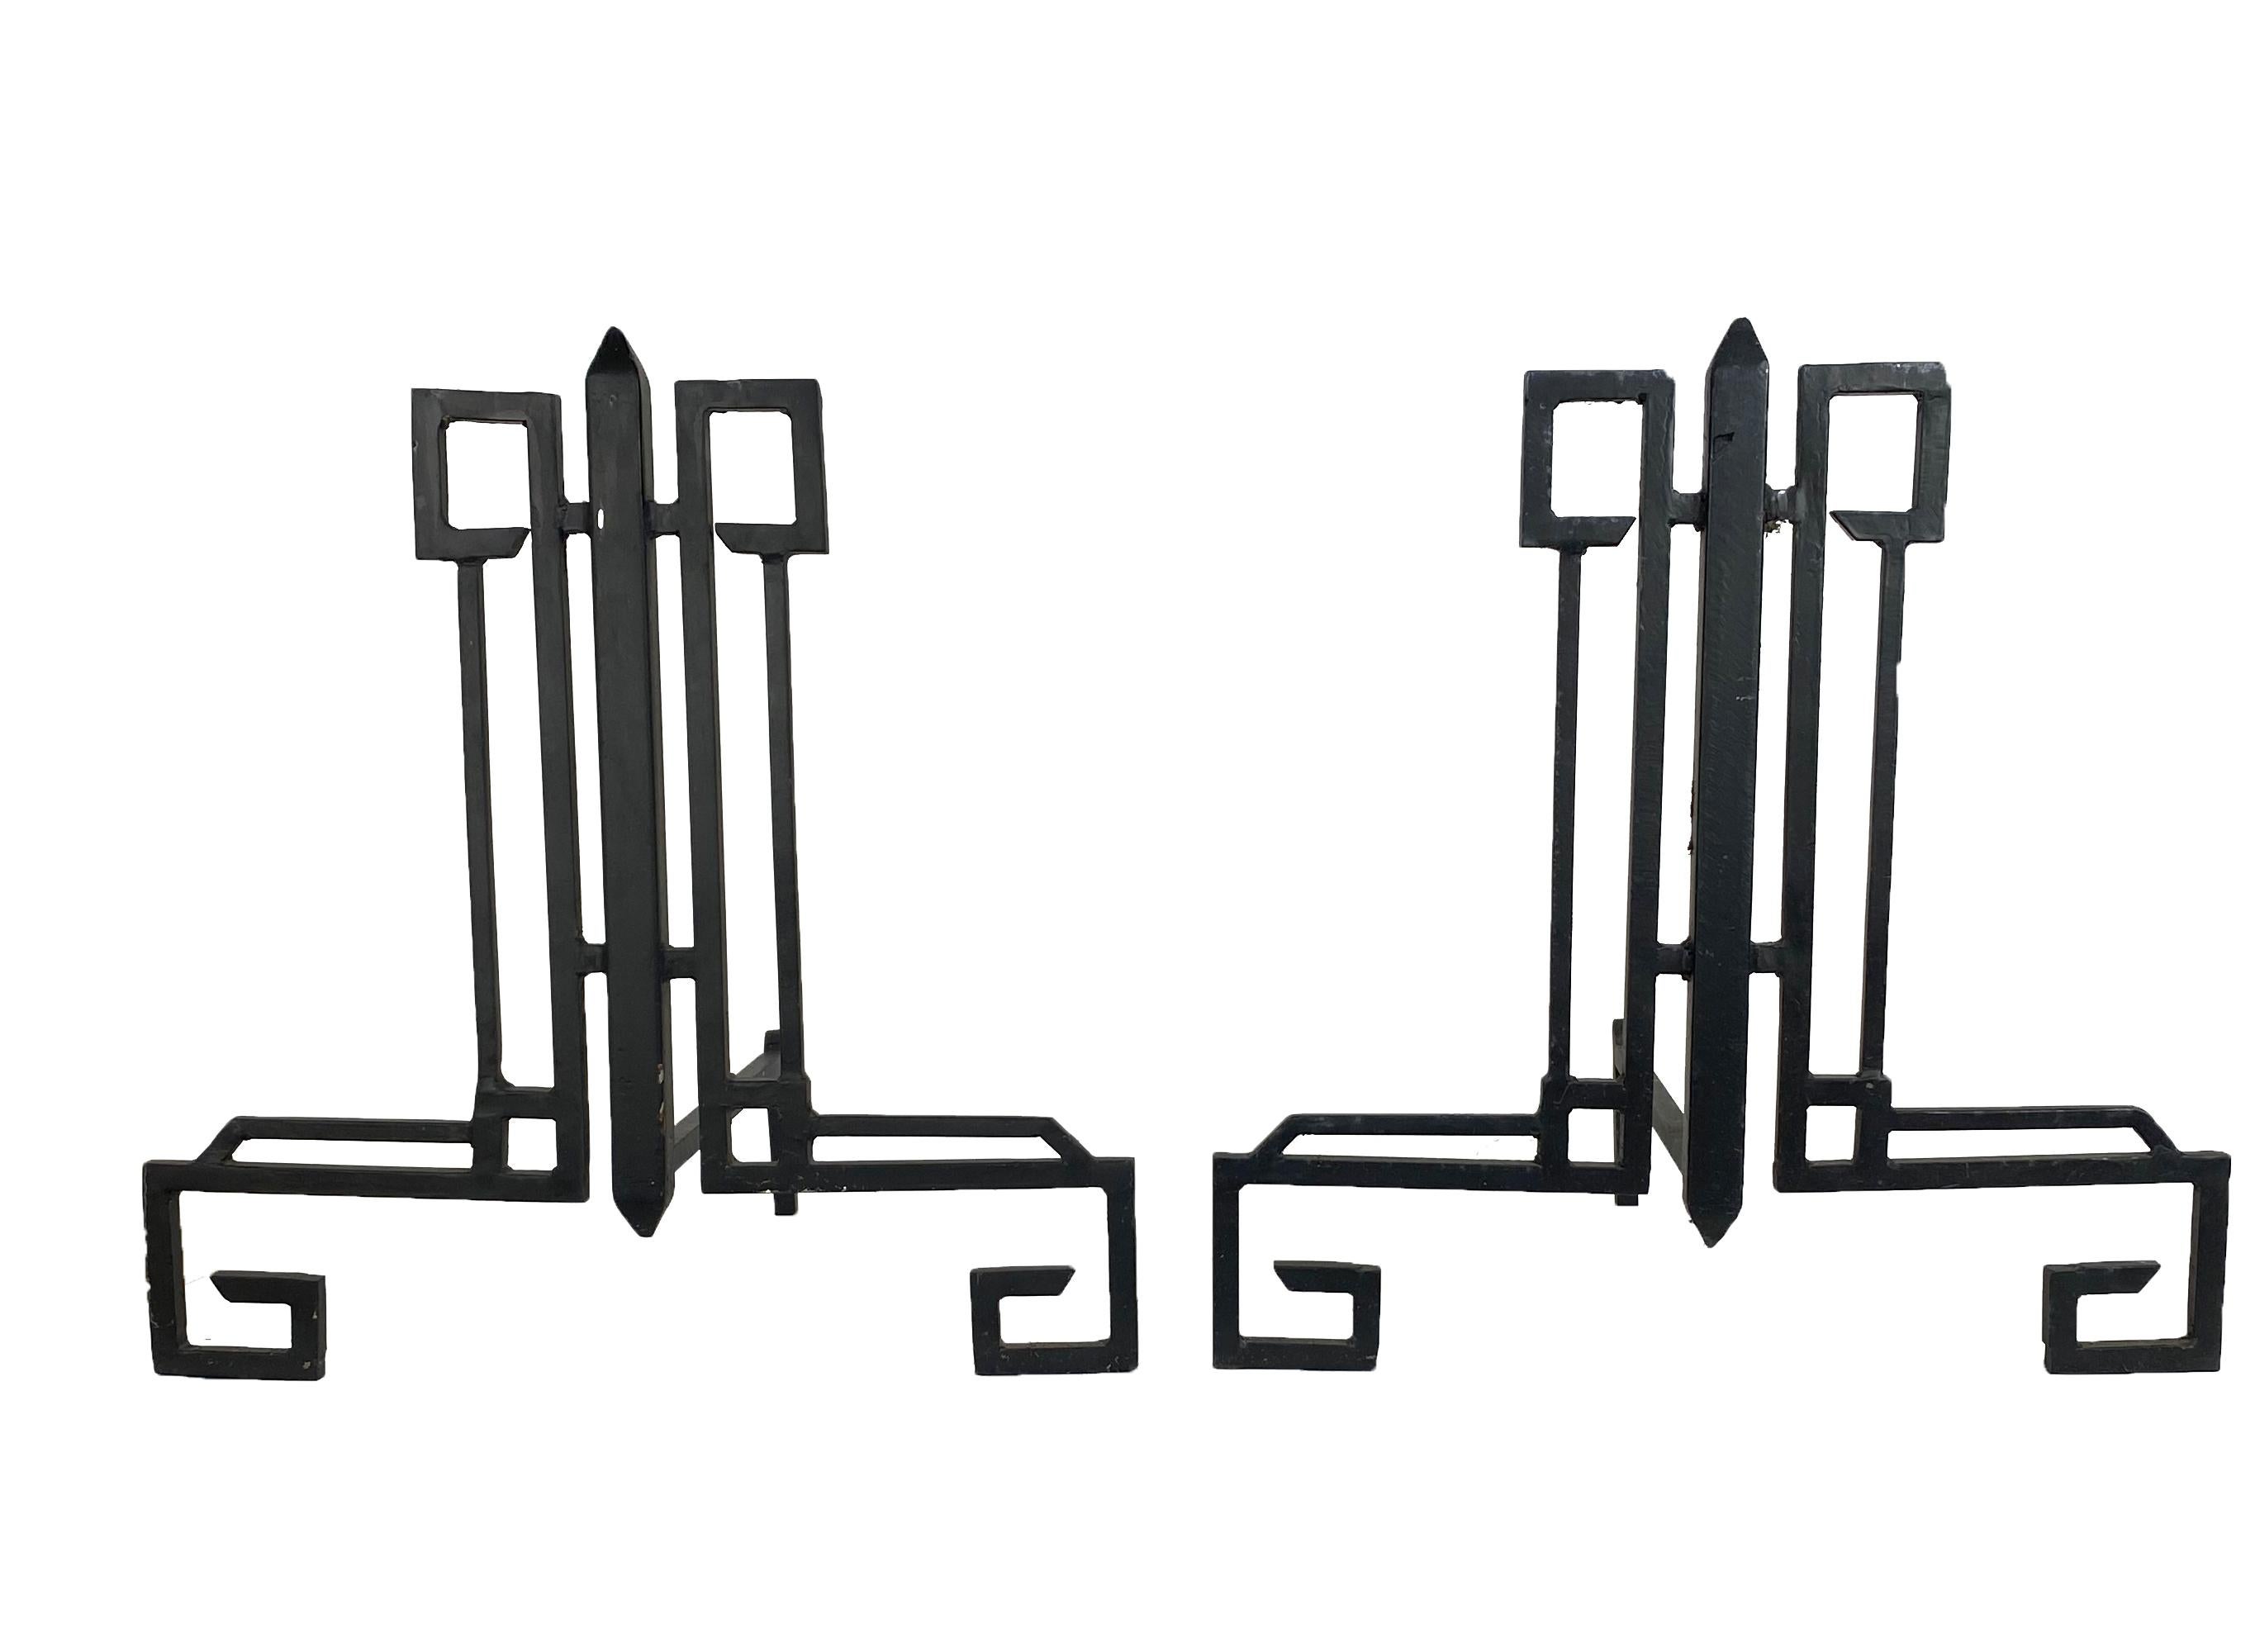 These wrought iron  fireplace Andirons could be classified Art Deco or Midcentury. They will do the job intended and look good doing it.  The iron fireplace log holders will work with log burning, or gas fireplace logs.  The geometric design made of